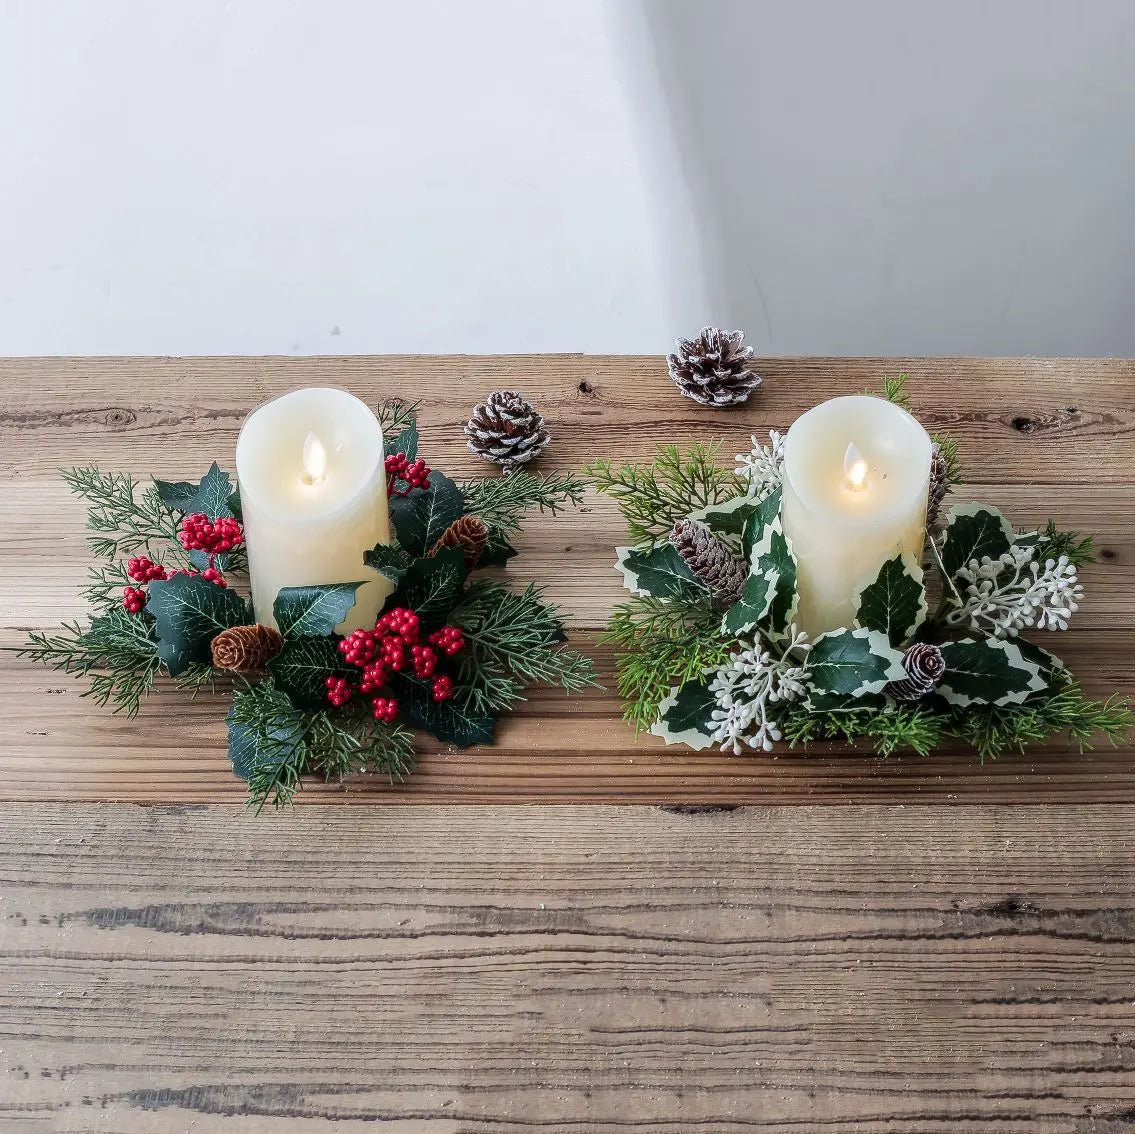 Christmas ornaments candle holder, candlestick wreath centerpiece artificial cherry pinecone garland Christmas wedding flowers.